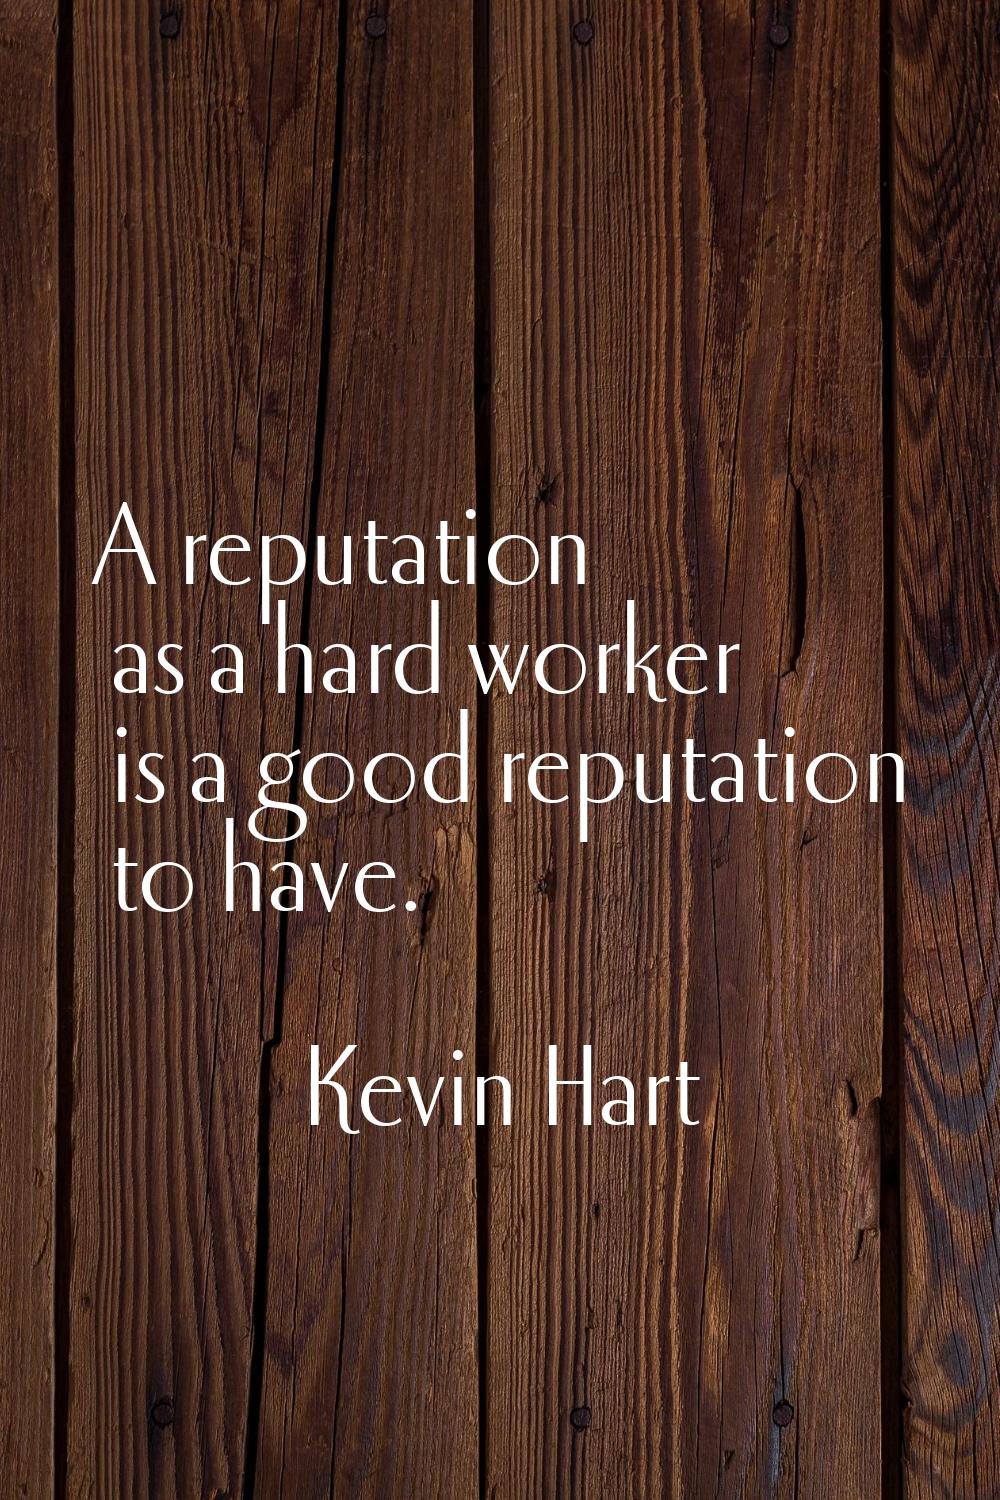 A reputation as a hard worker is a good reputation to have.